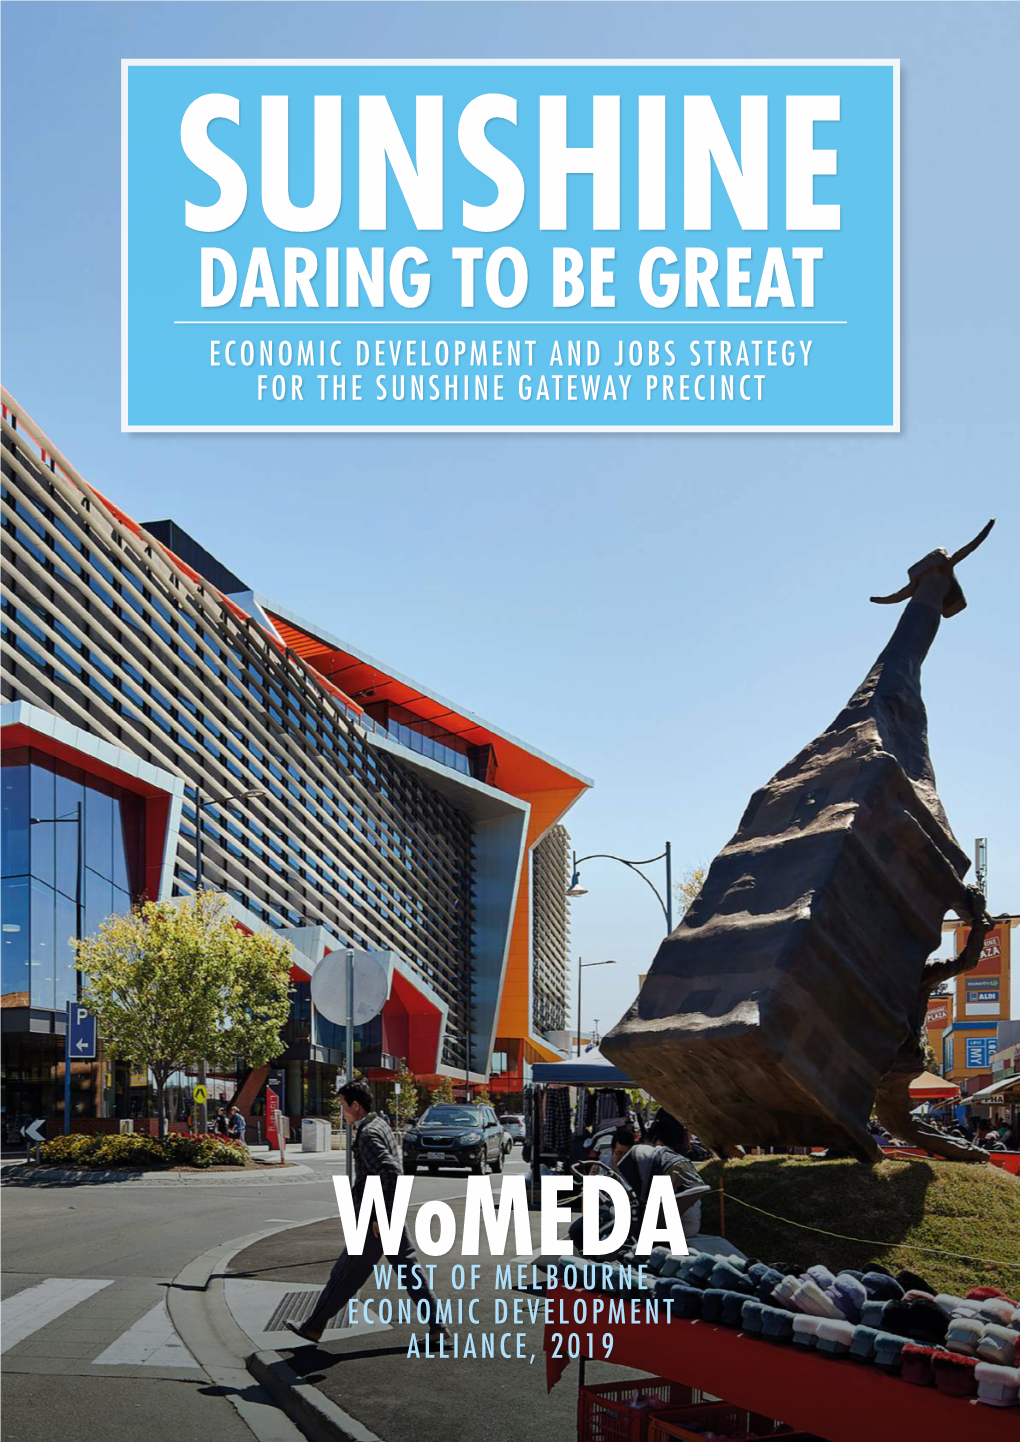 Daring to Be Great. Economic Development and Jobs Strategy for the Sunshine Gateway Precinct